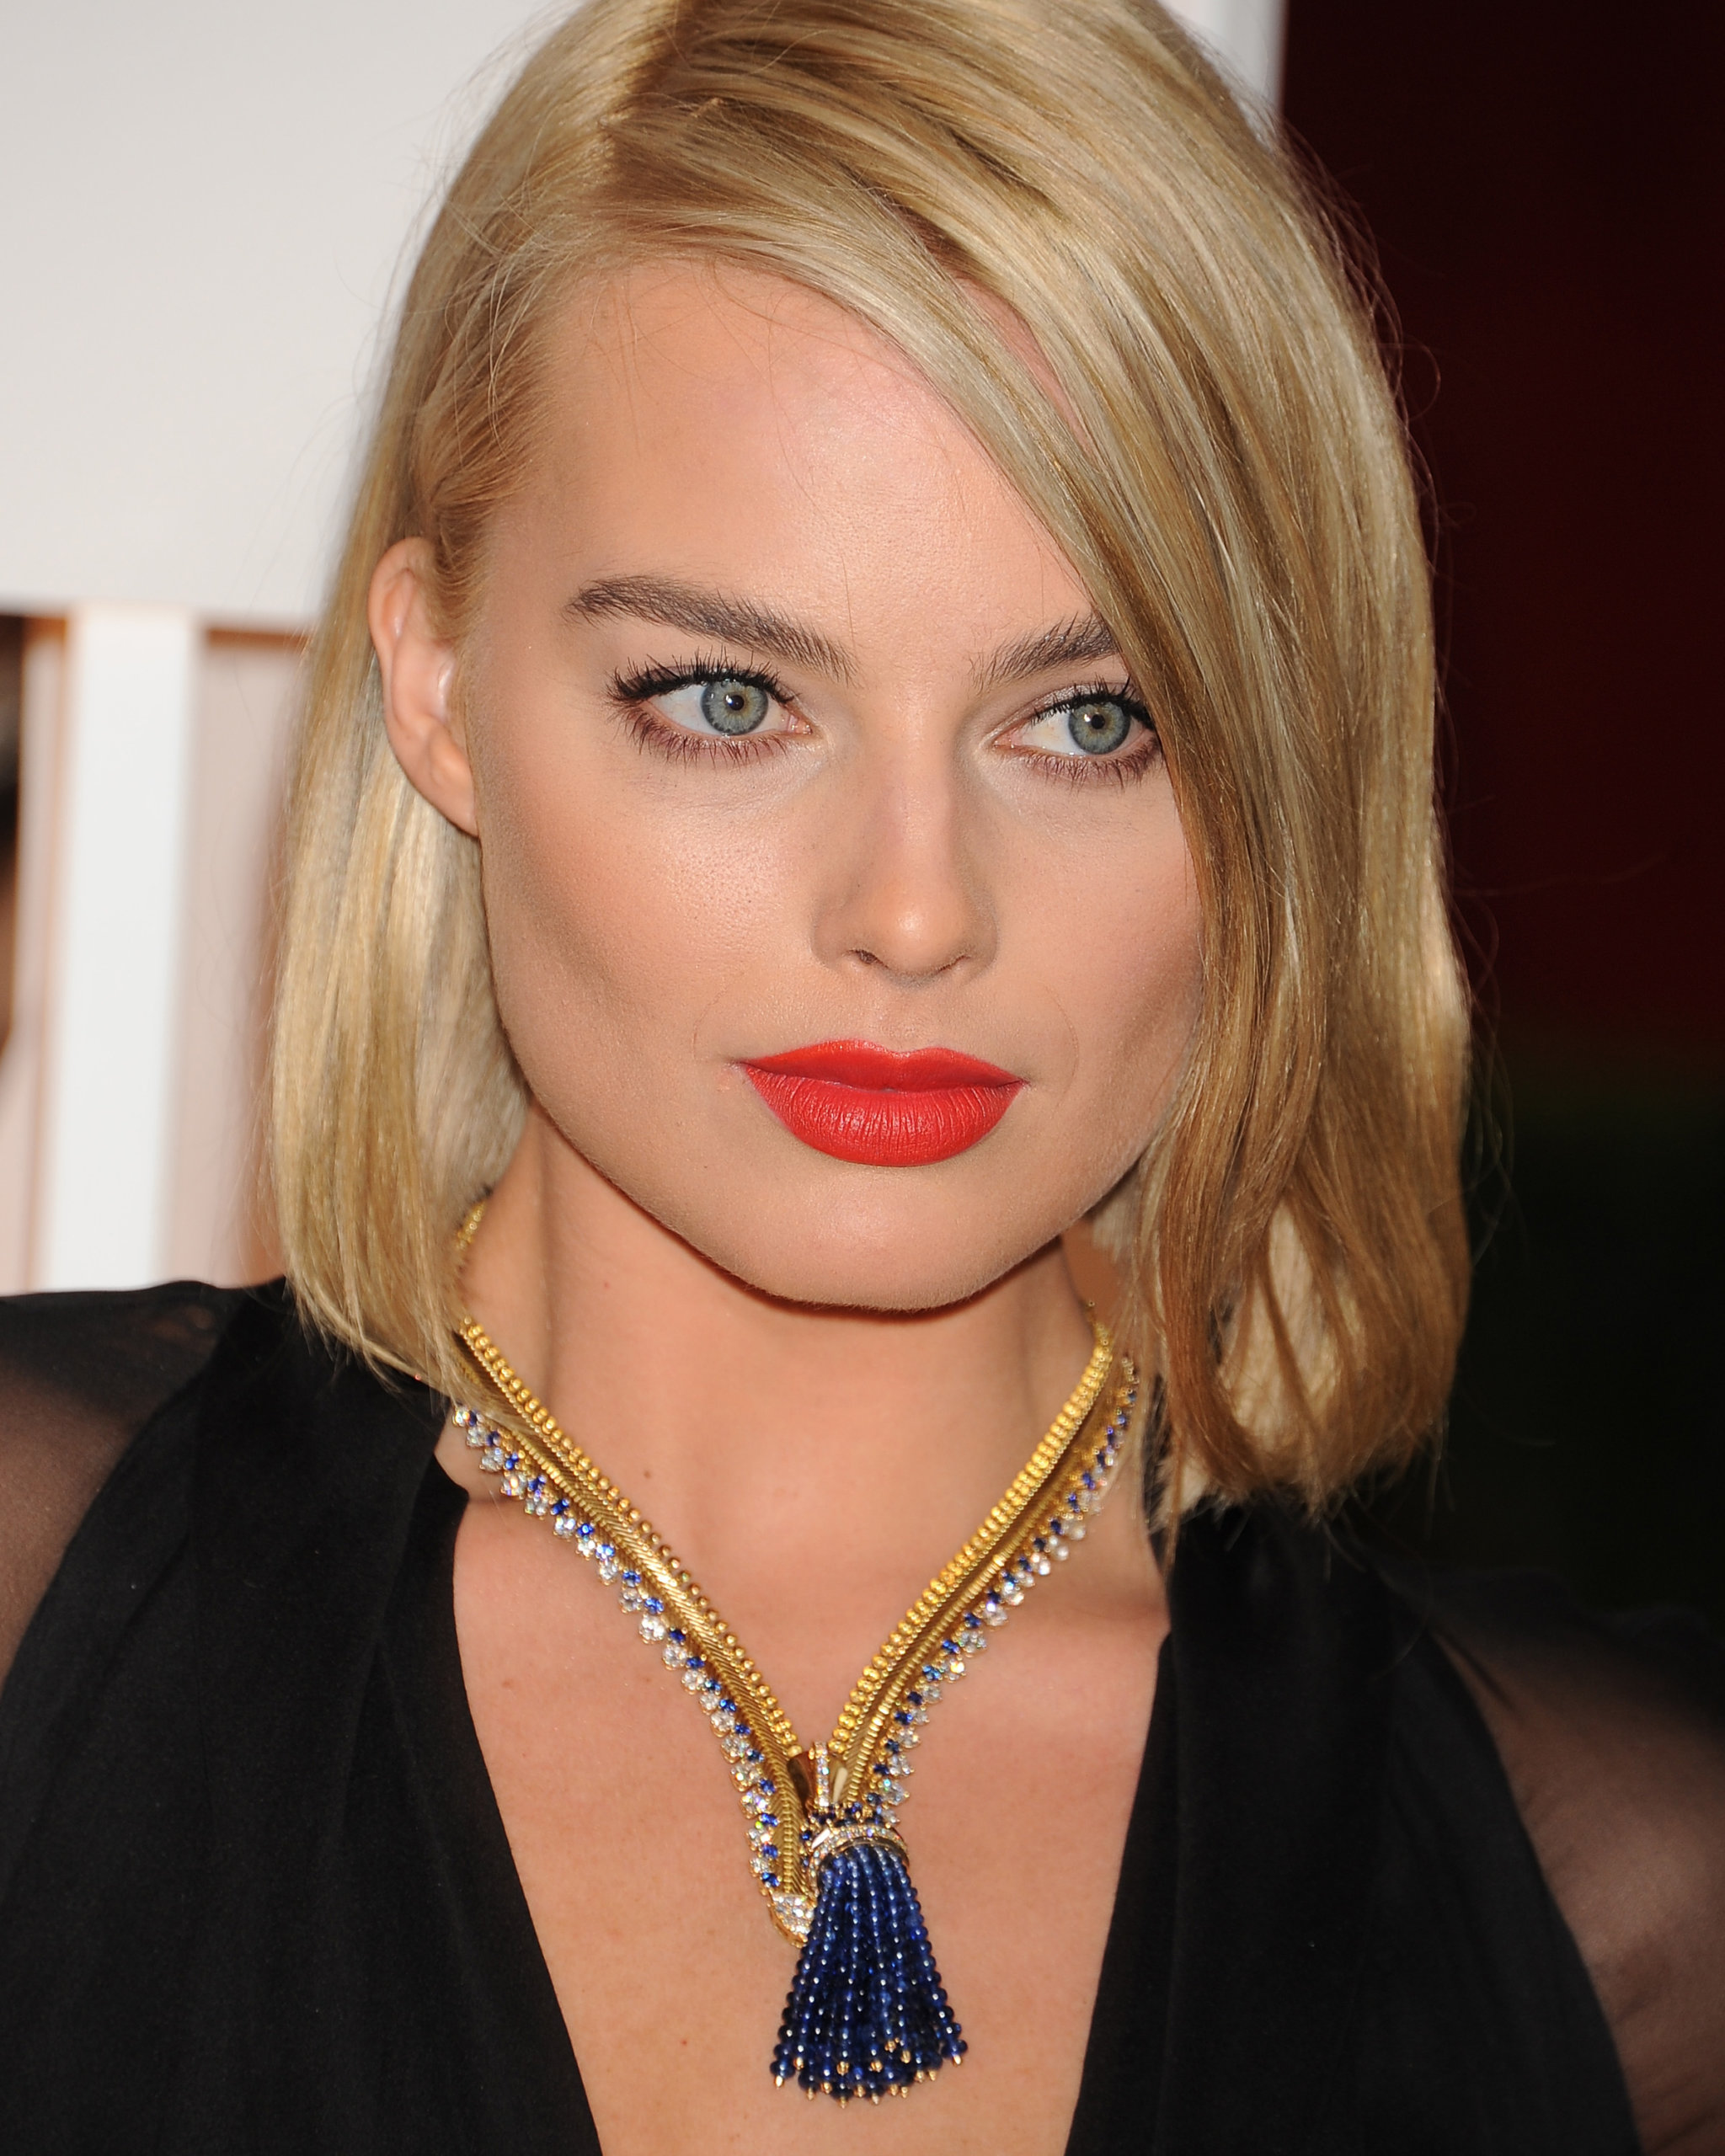 Margot Robbie wearing a zip diamond necklace with round cut diamonds and blue sapphires in gold at the 2015 Academy Awards